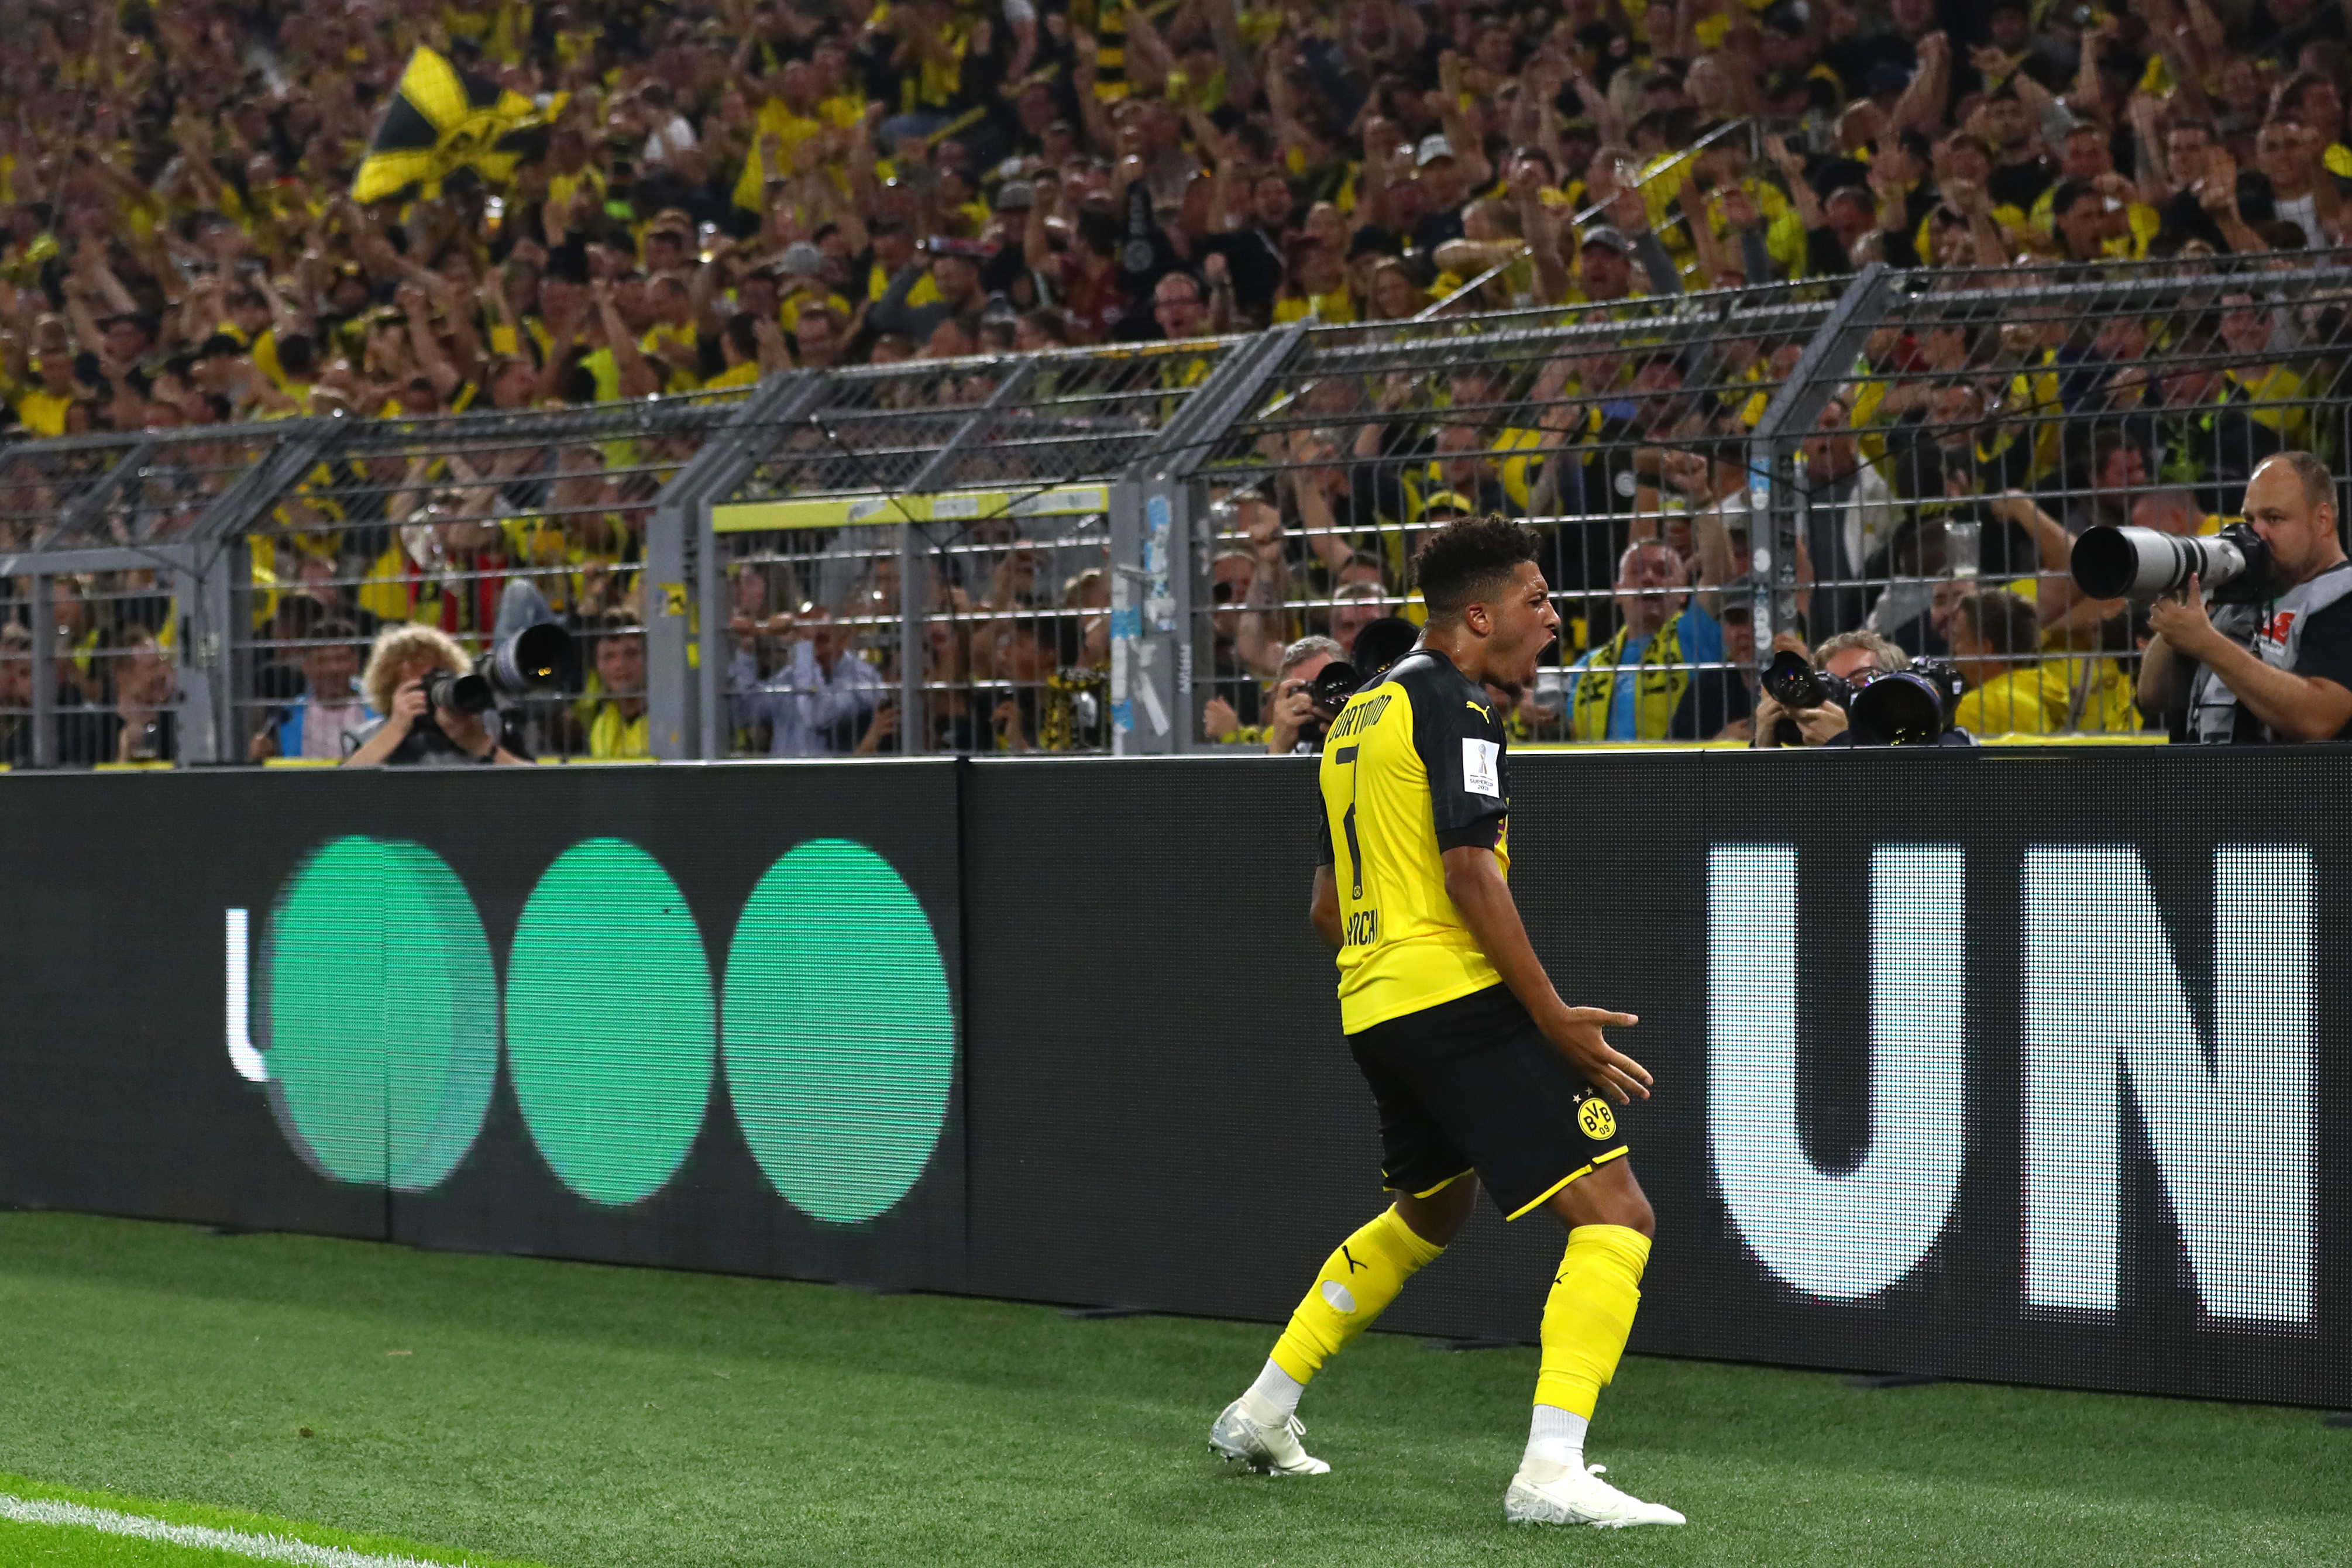 DORTMUND, GERMANY - AUGUST 03: Jadon Sancho of Borussia Dortmund celebrates after scoring his team's second goal during the DFL Supercup 2019 match between Borussia Dortmund and FC Bayern München at Signal Iduna Park on August 03, 2019 in Dortmund, Germany. (Photo by Martin Rose/Bongarts/Getty Images)